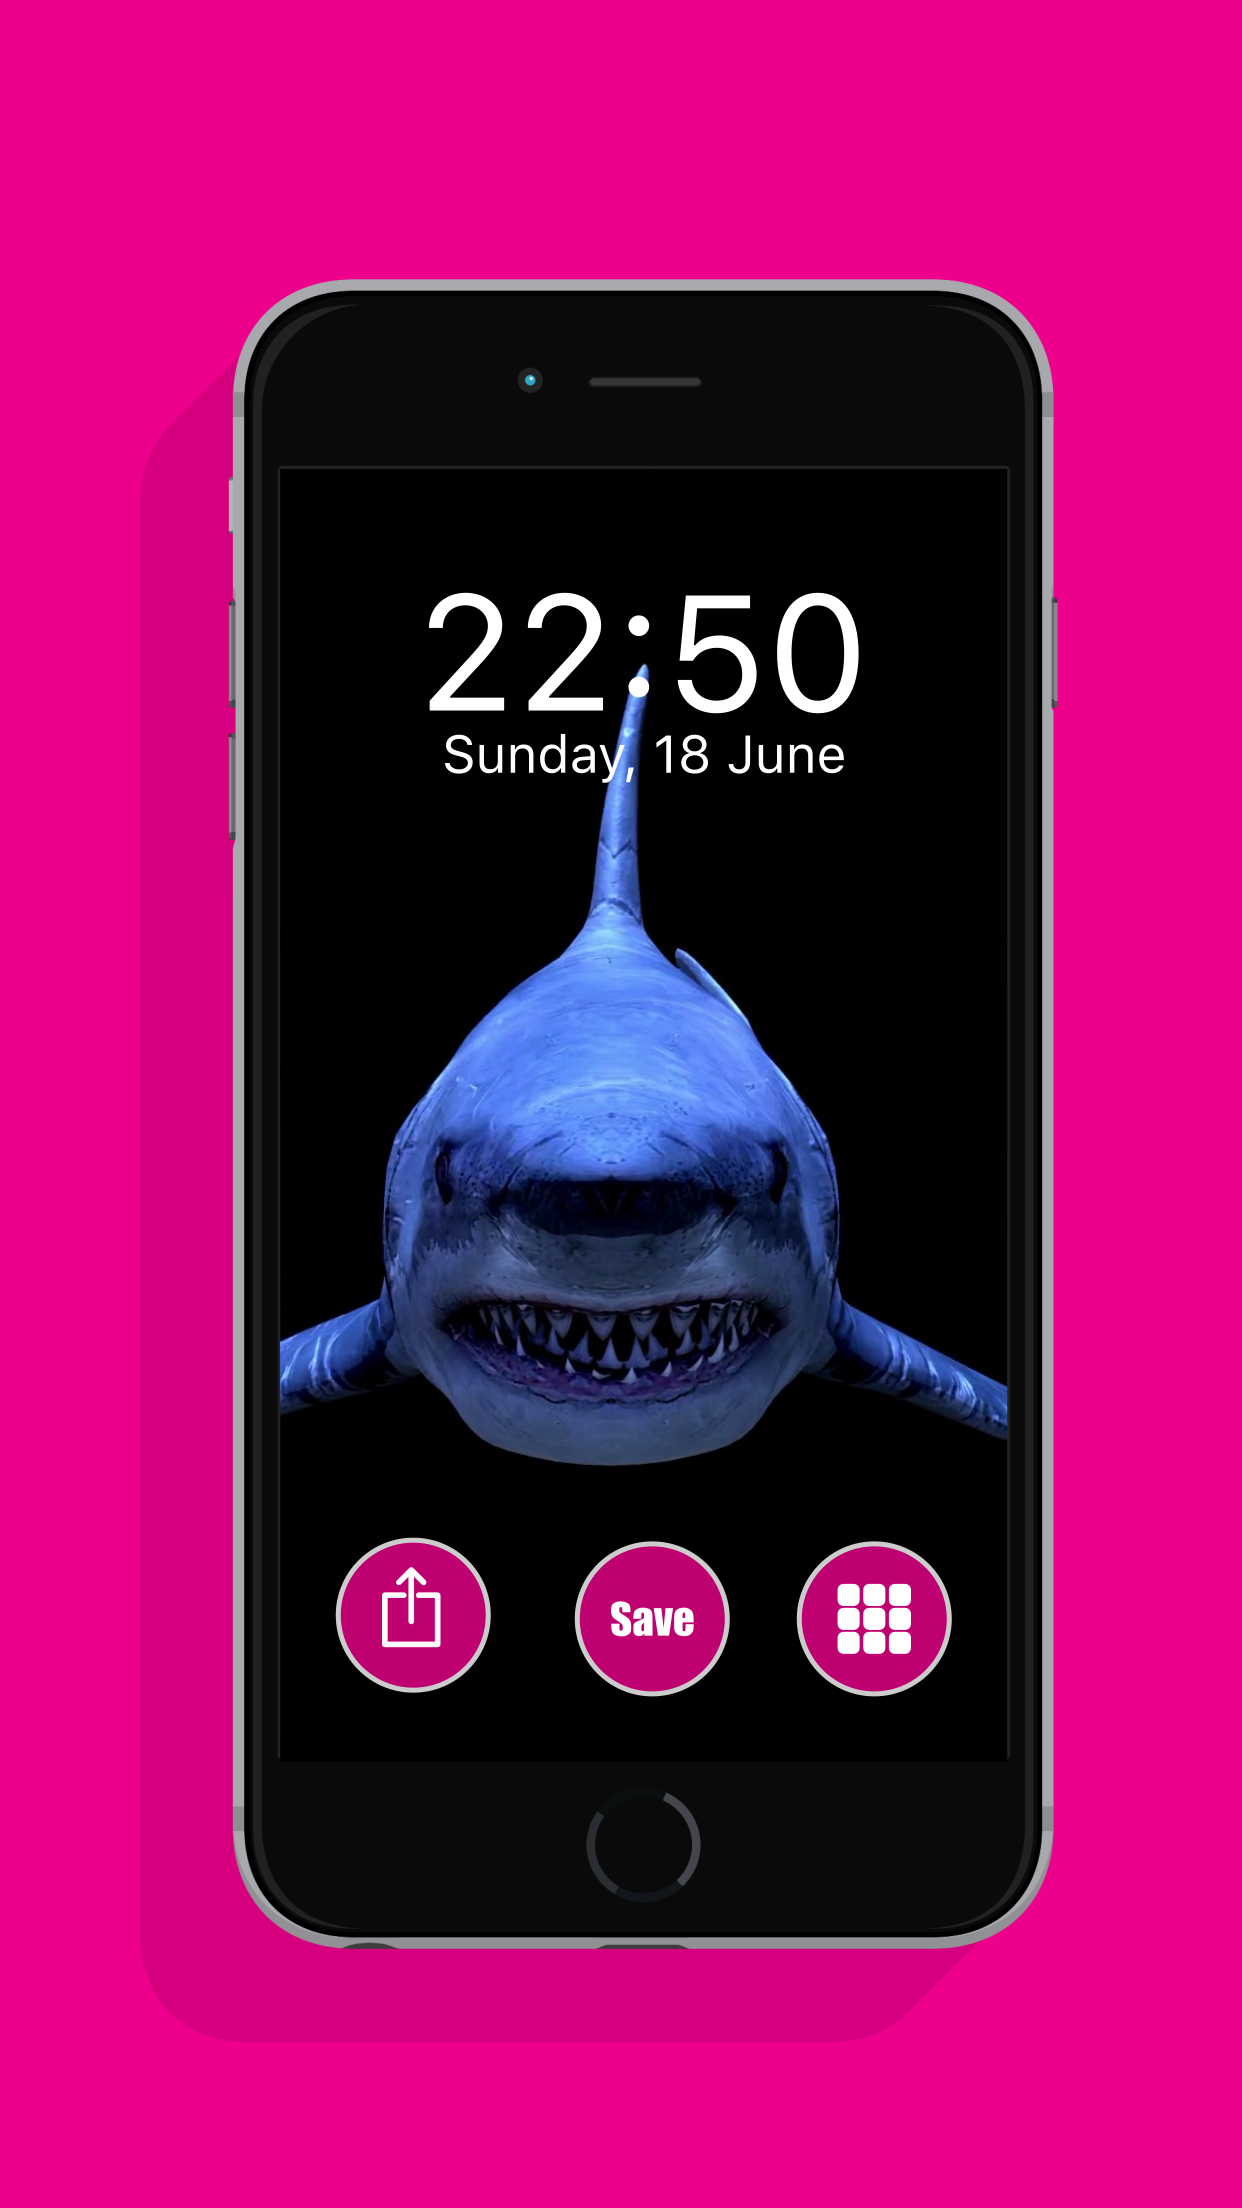 live wallpaper iphone,product,mobile phone,mobile phone case,gadget,mobile phone accessories